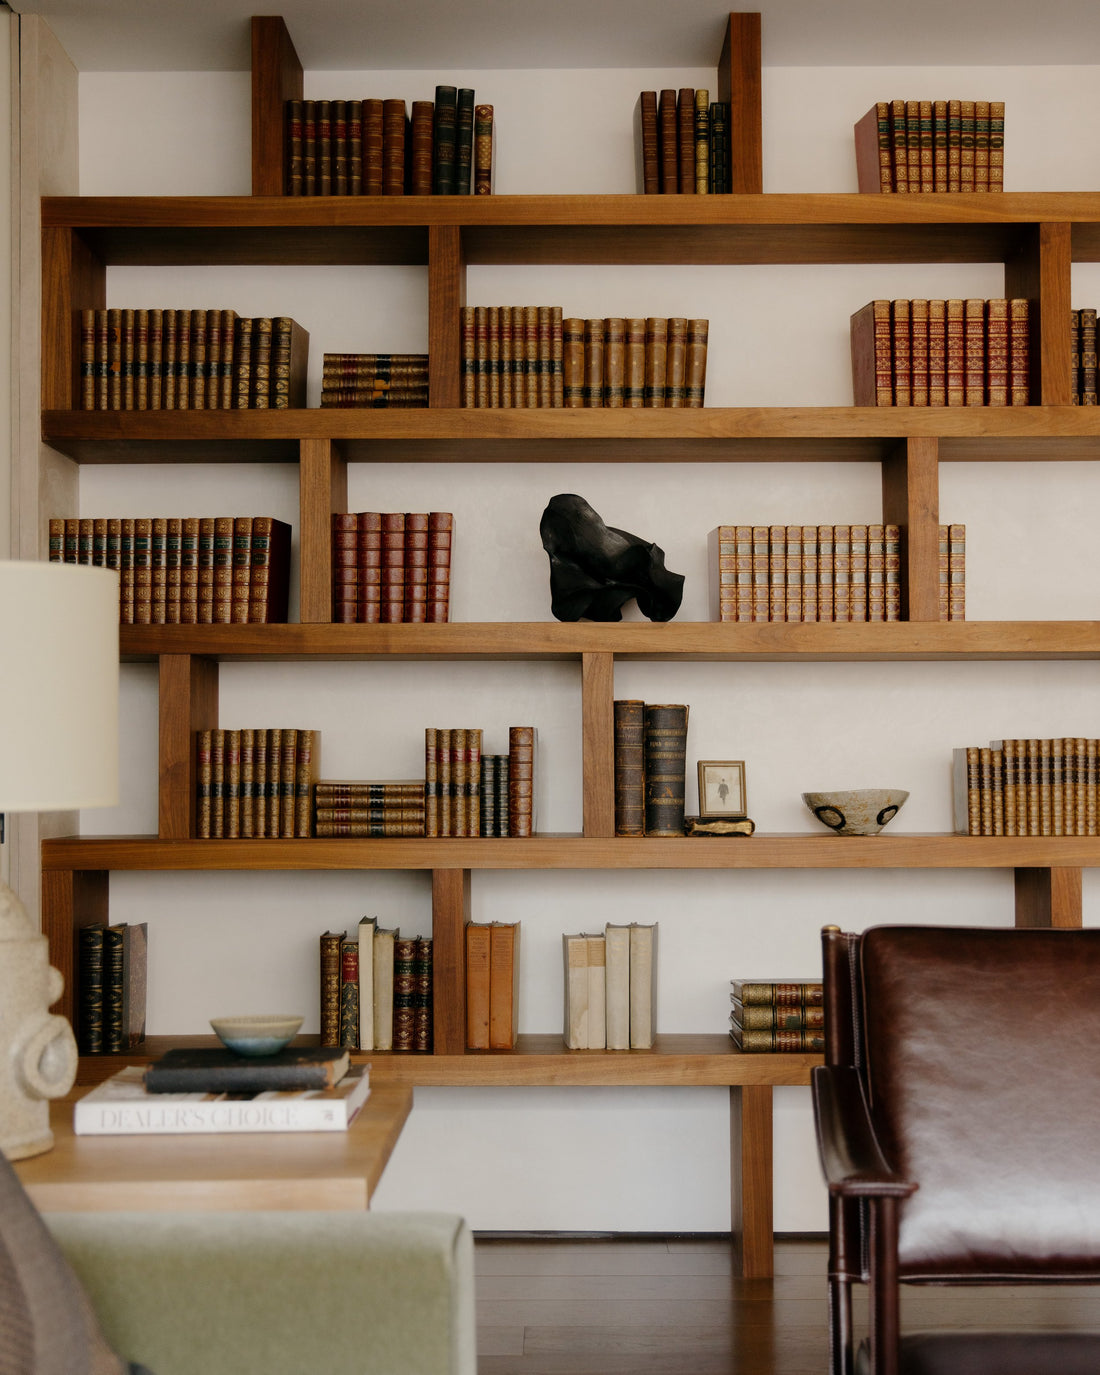 The Best Way to Decorate a Bookcase